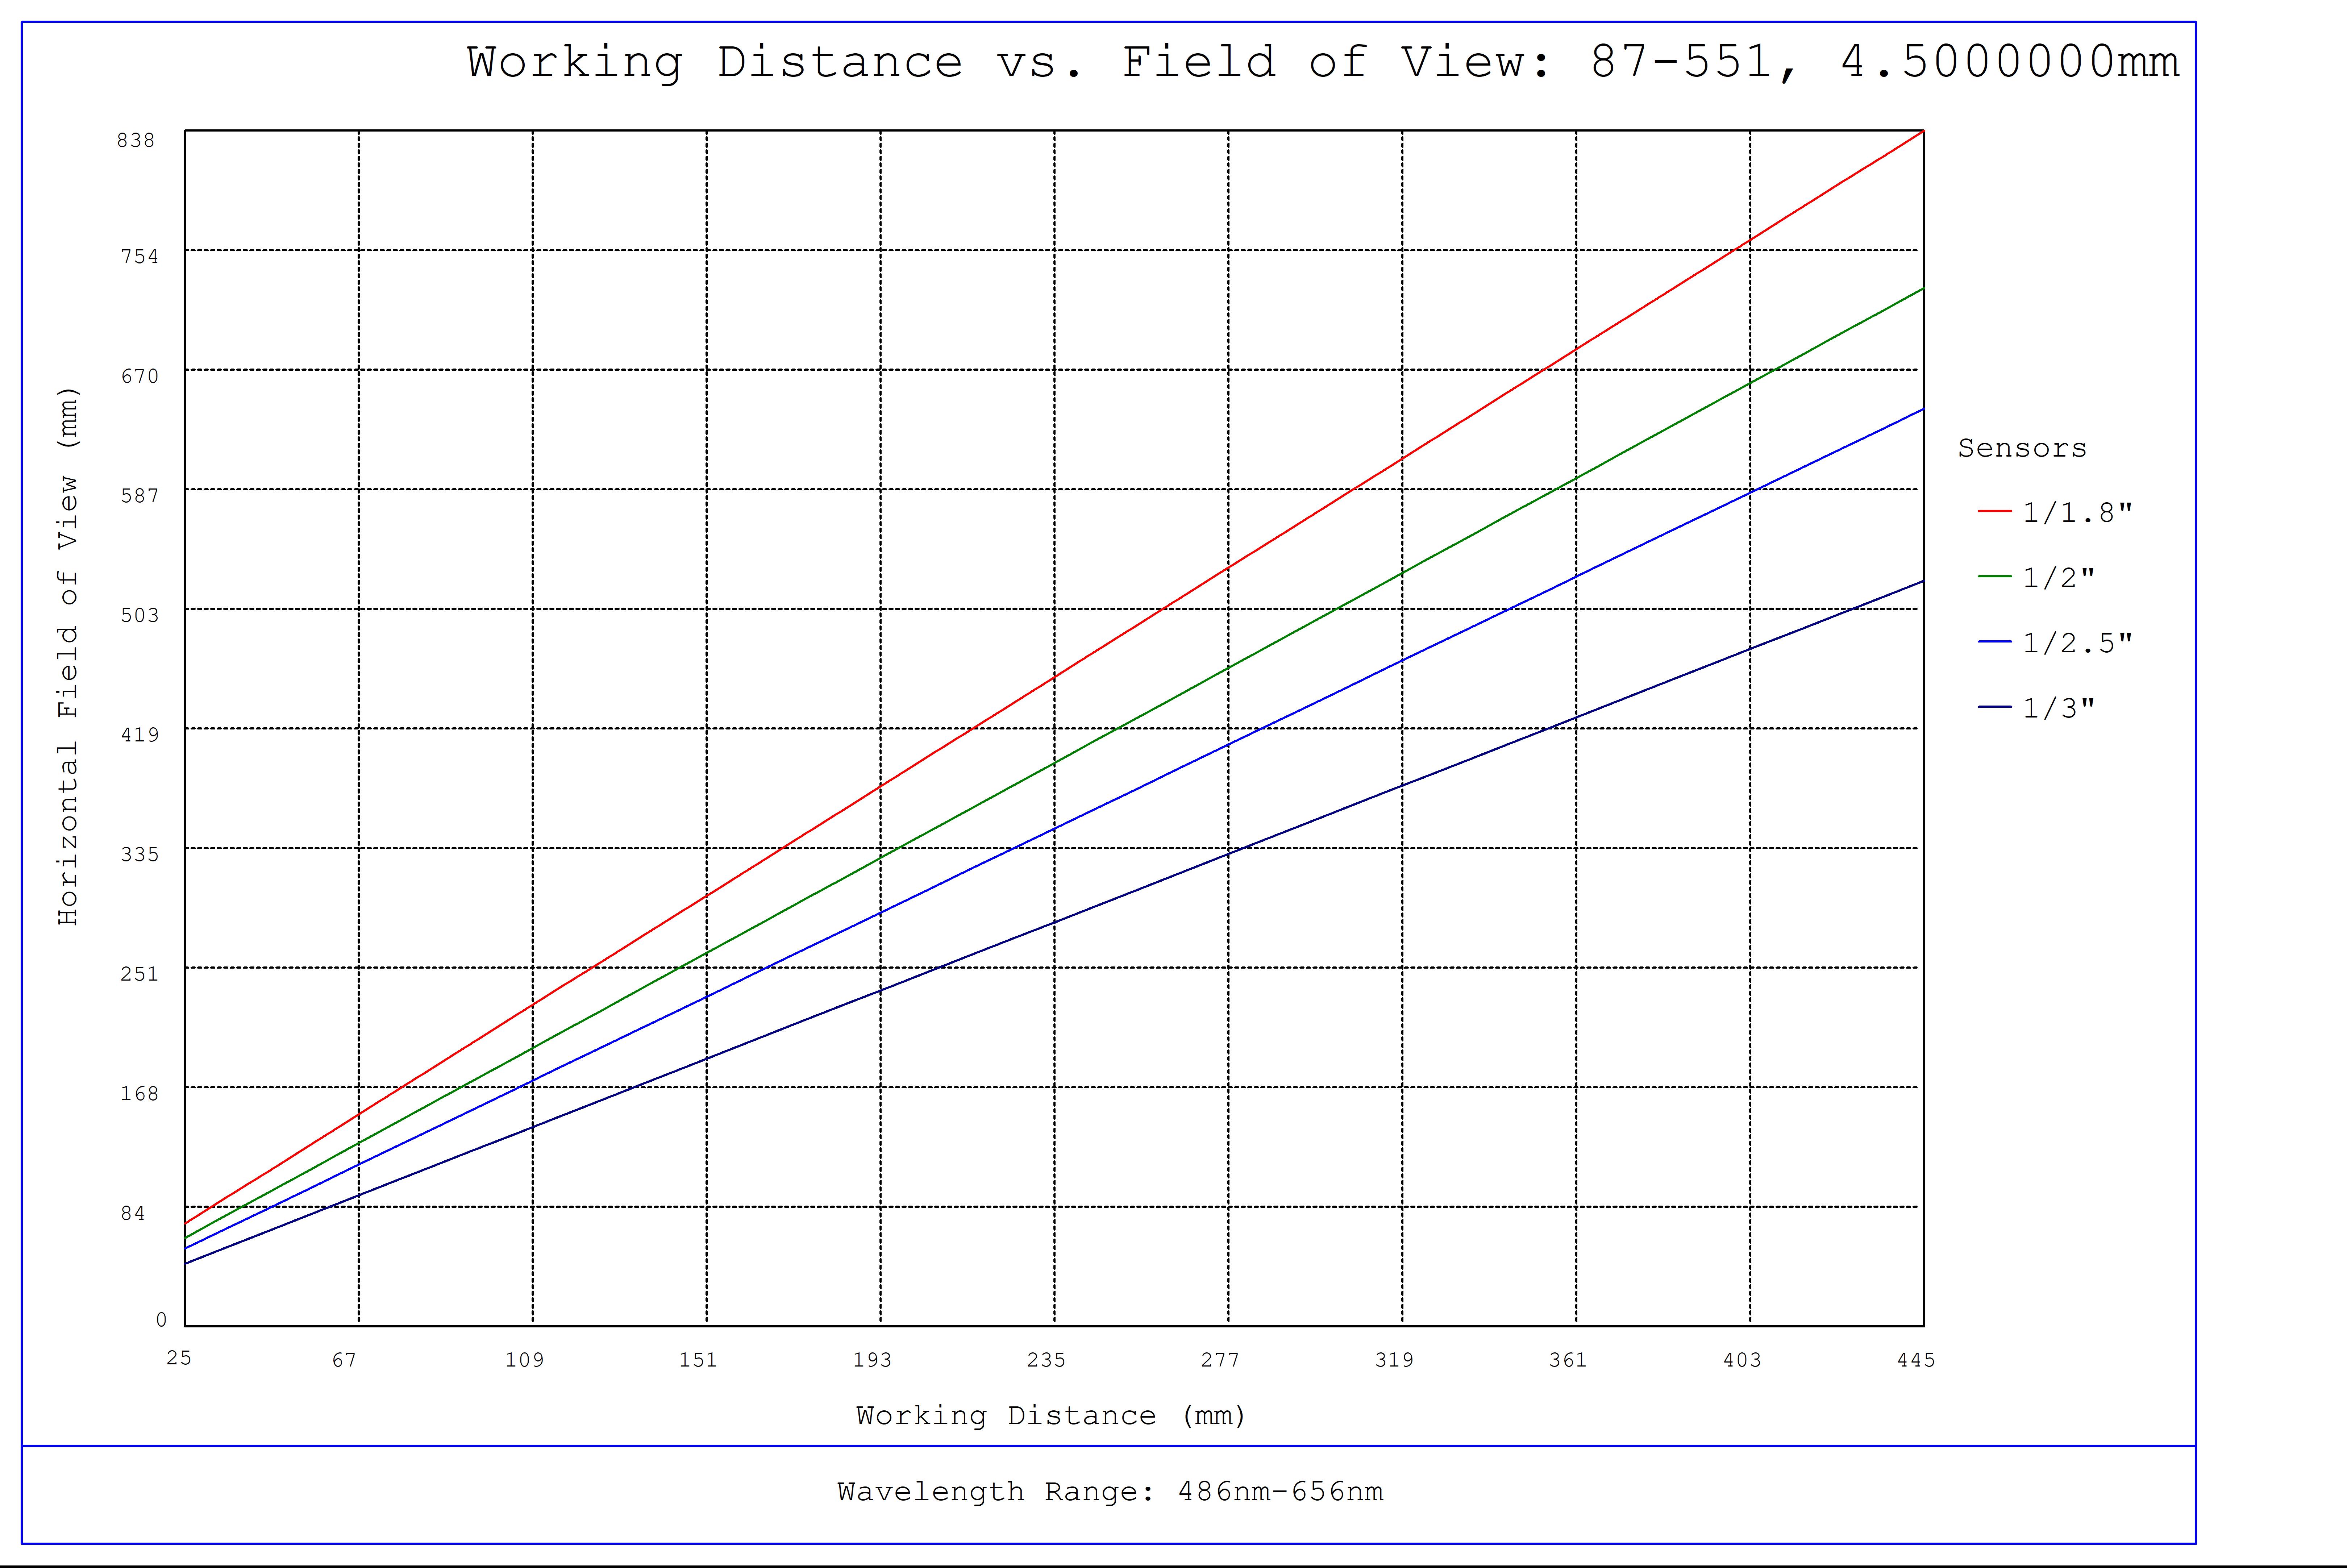 #87-551, 4.5mm, f/2 Ci Series Fixed Focal Length Lens, Working Distance versus Field of View Plot